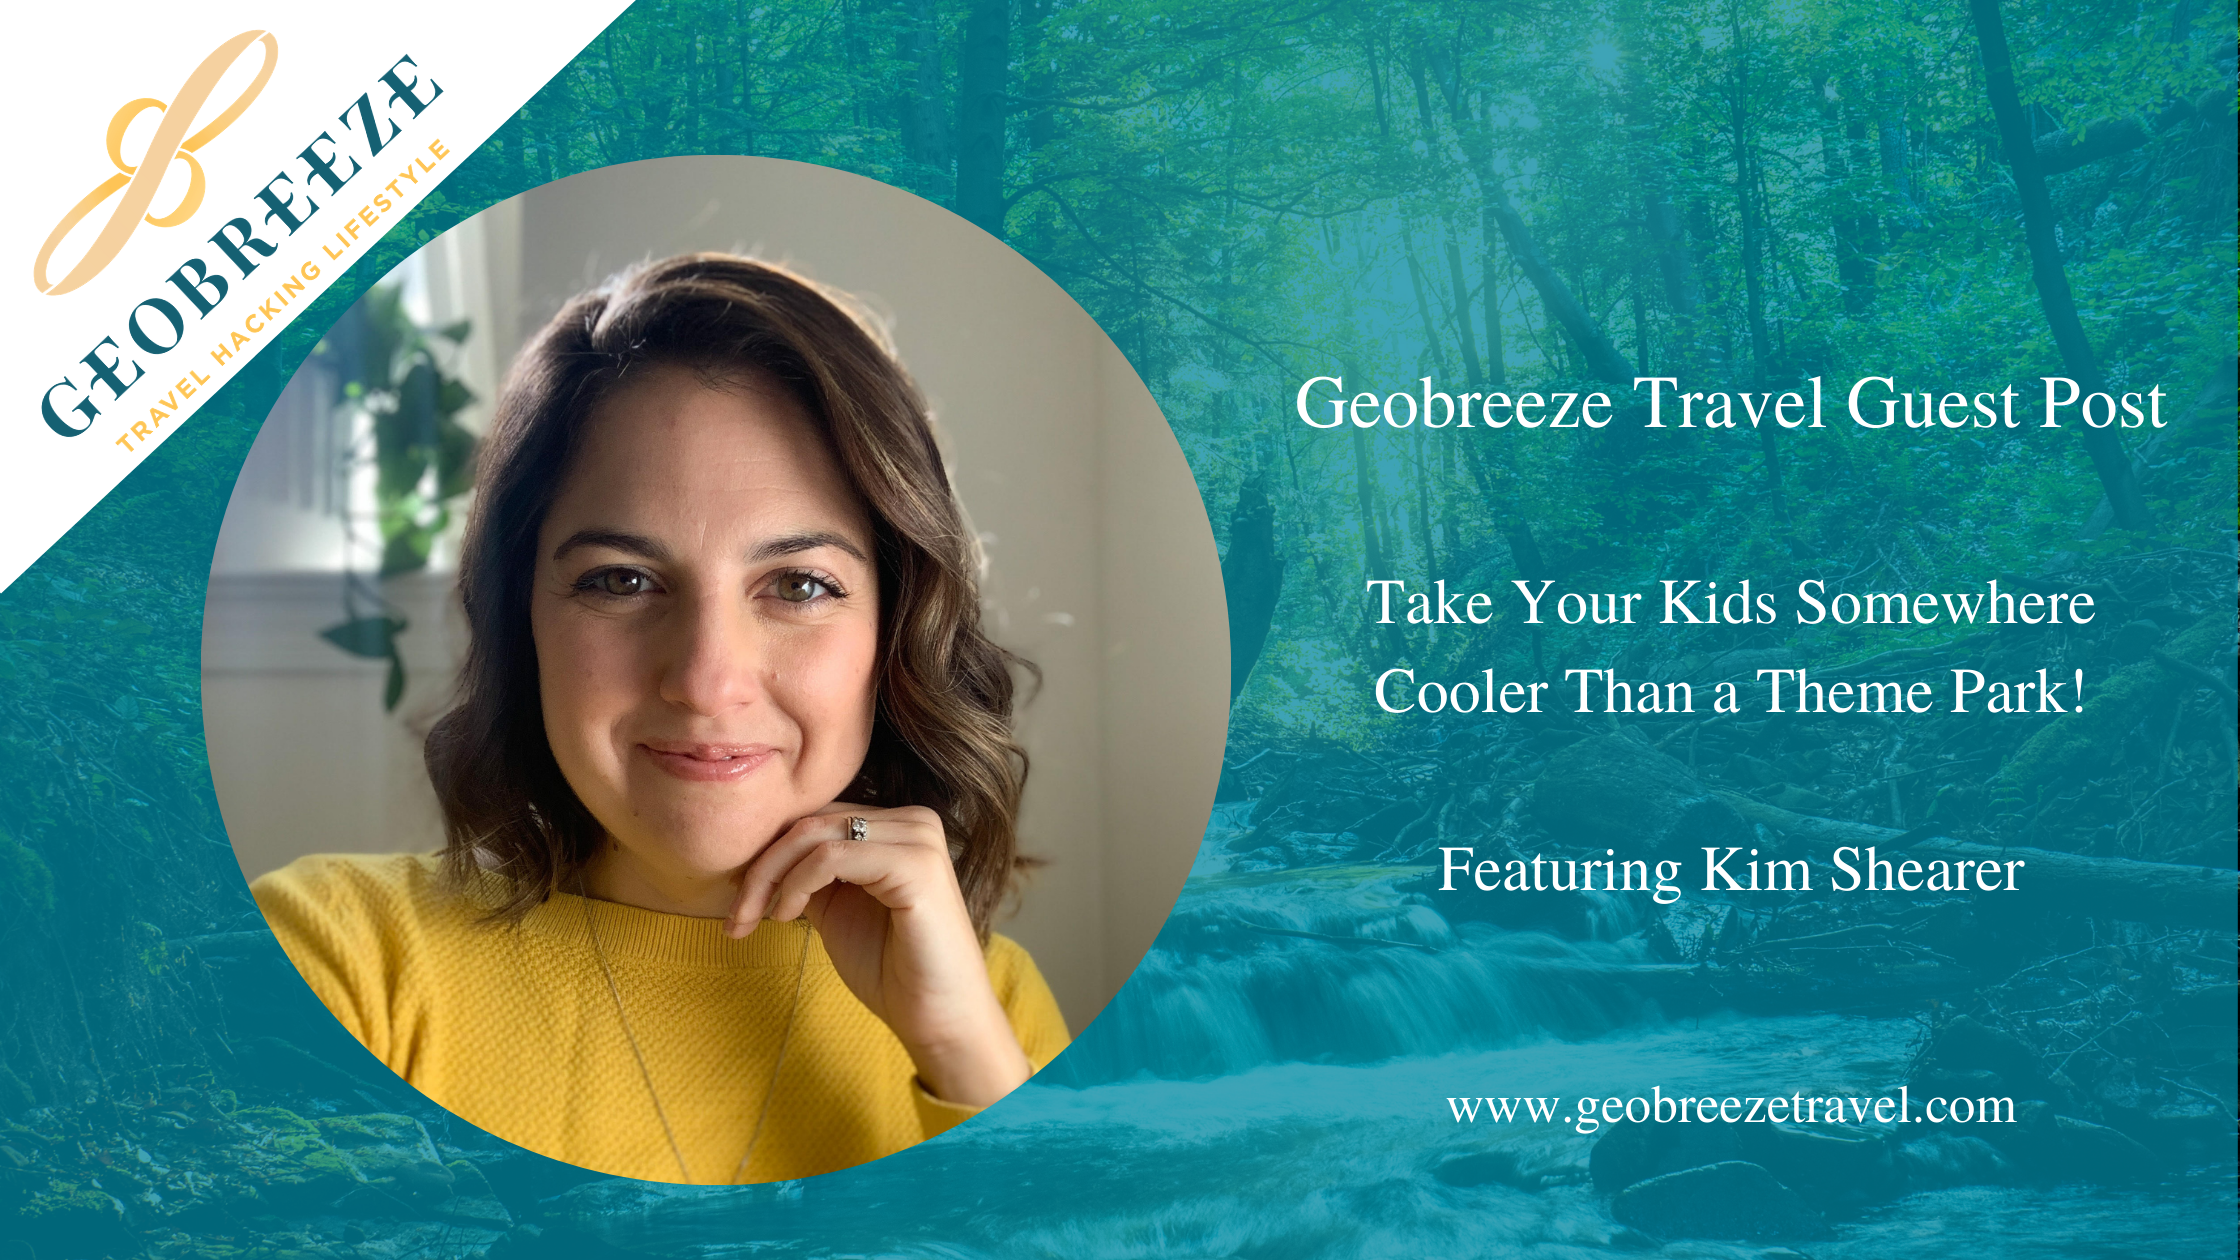 Guest Post: Take Your Kids Somewhere Cooler Than a Theme Park! with Kim Shearer